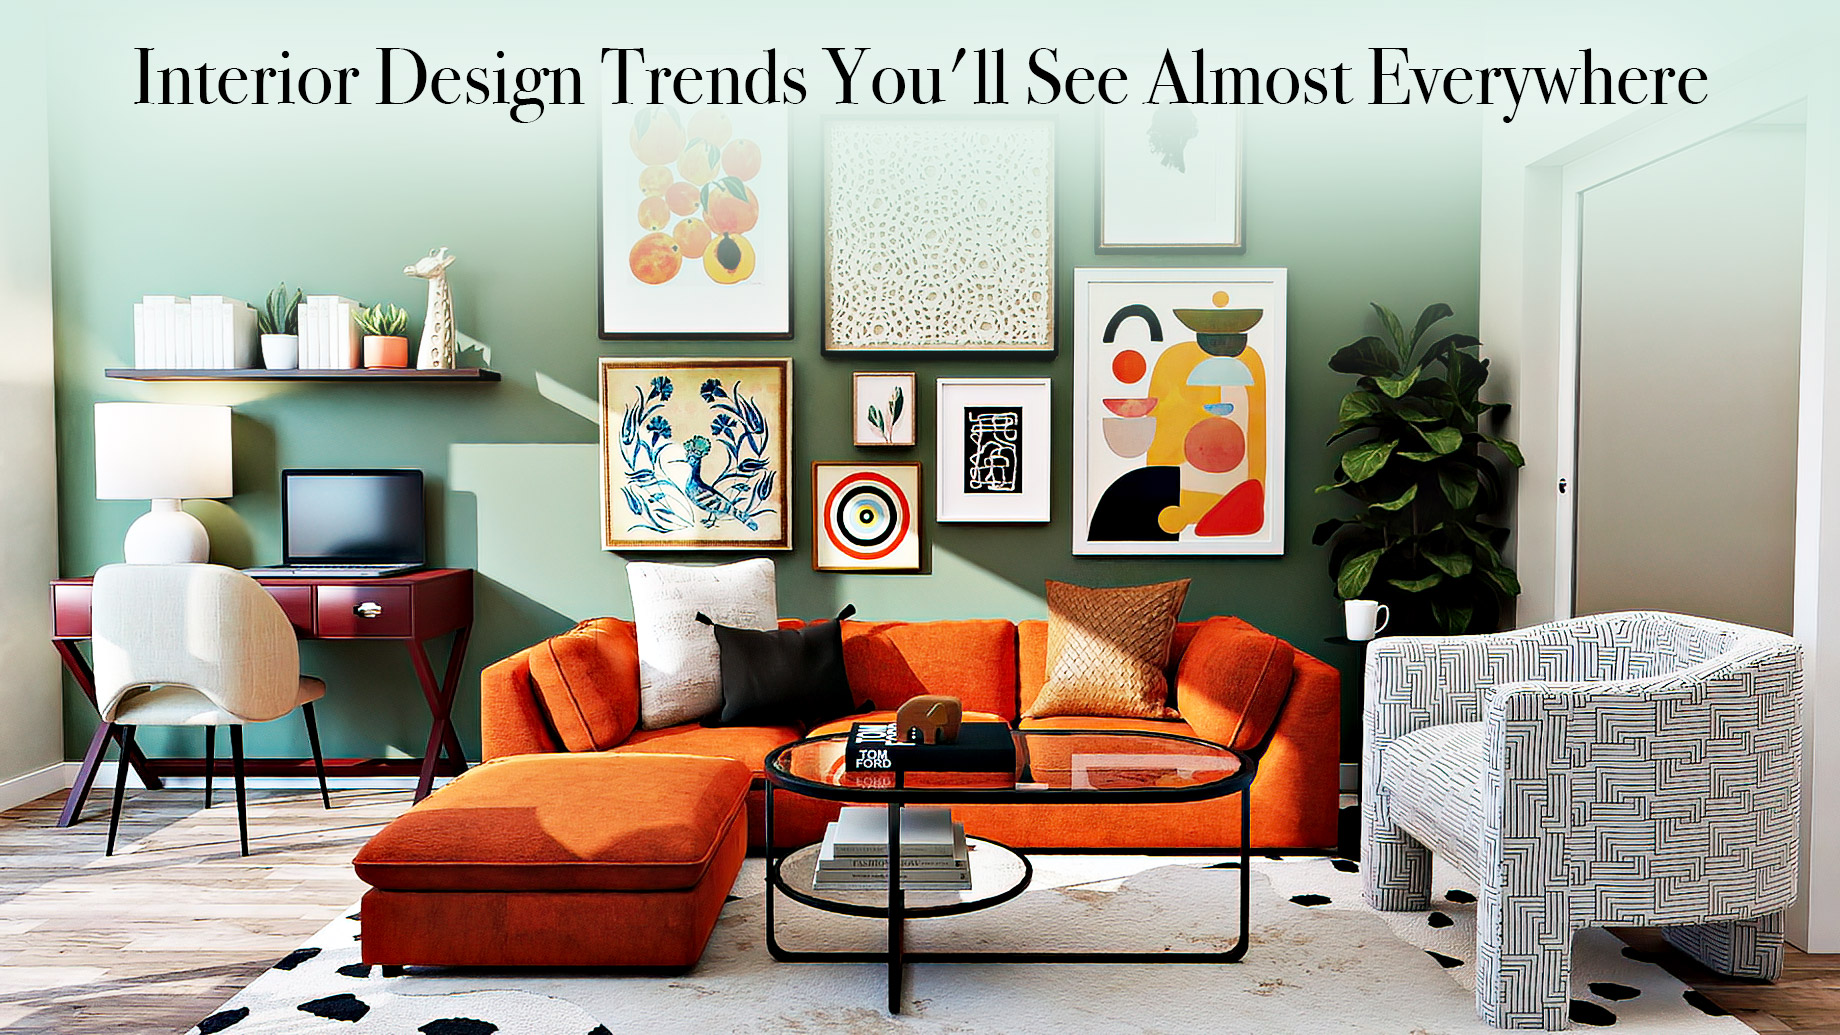 Interior Design Trends You'll See Almost Everywhere